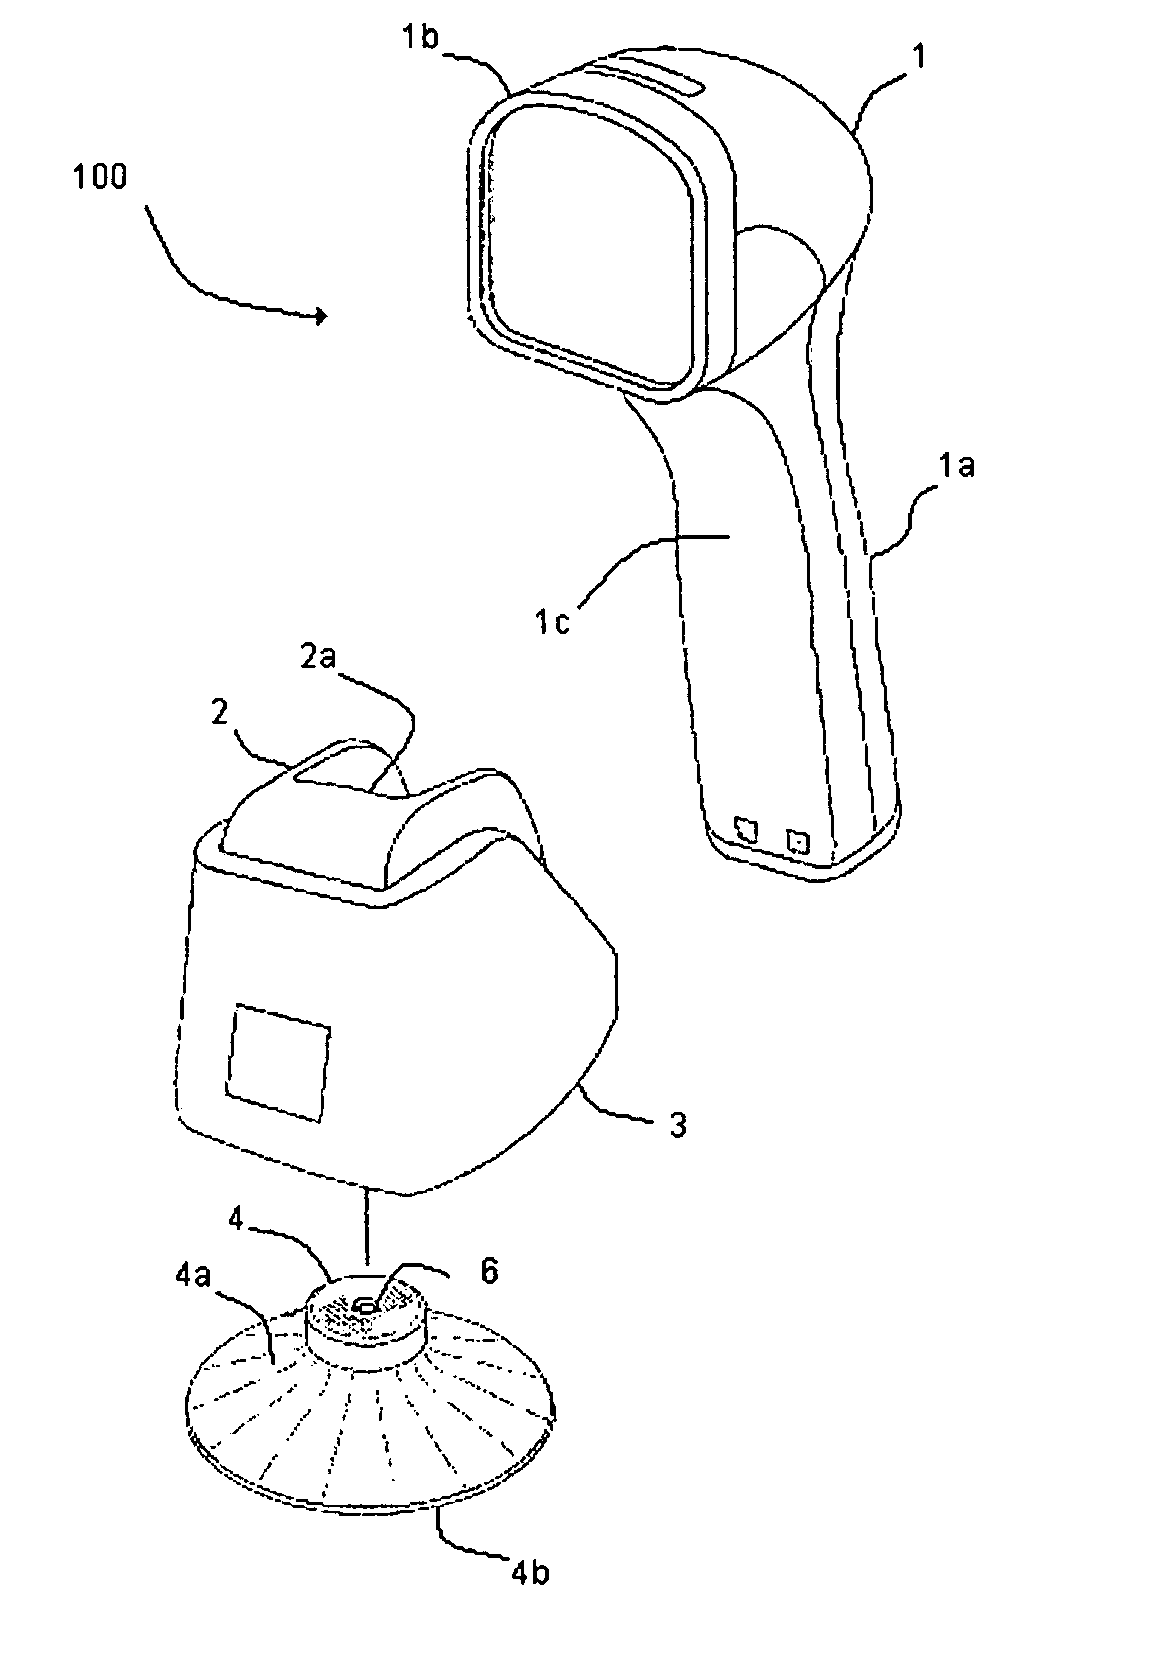 Suction mounted bar code symbol reading system, apparatus and stand